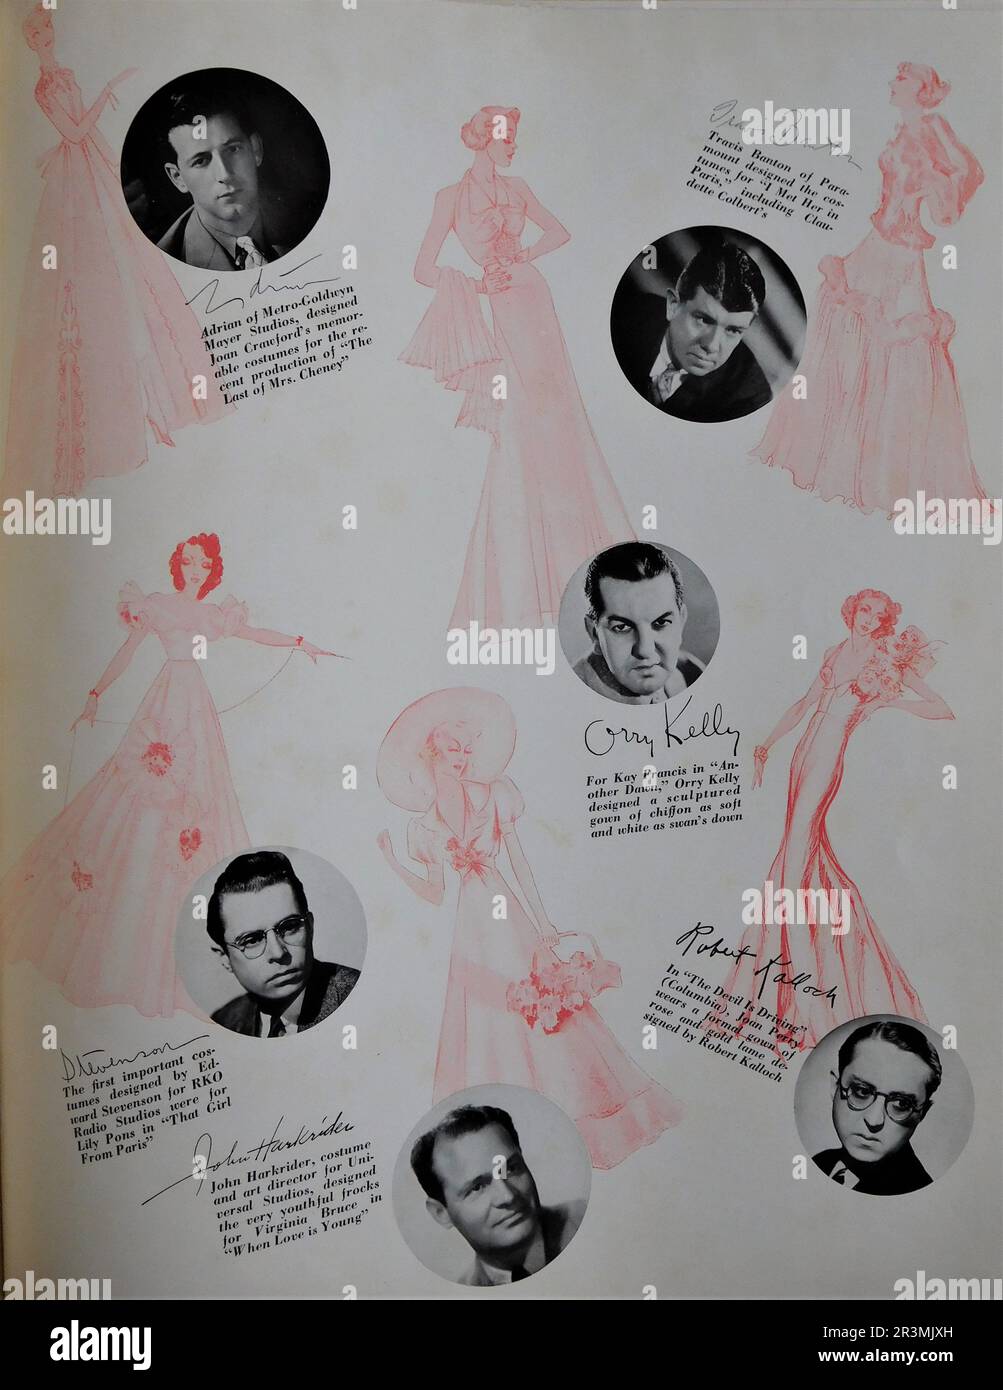 Costume Designers GILBERT ADRIAN with dress design for Joan Crawford TRAVIS BANTON with design for Claudette Colbert ORRY-KELLY with design for Kay Francis EDWARD STEVENSON with design for Lily Pons JOHN HARKRIDER with design for Virginia Bruce and ROBERT KALLOCH with design for Joan Perry from article The Men Behind the Gowns by Pamela Pratt Forbes in the June 1937 edition of CINEMA ARTS magazine. Stock Photo